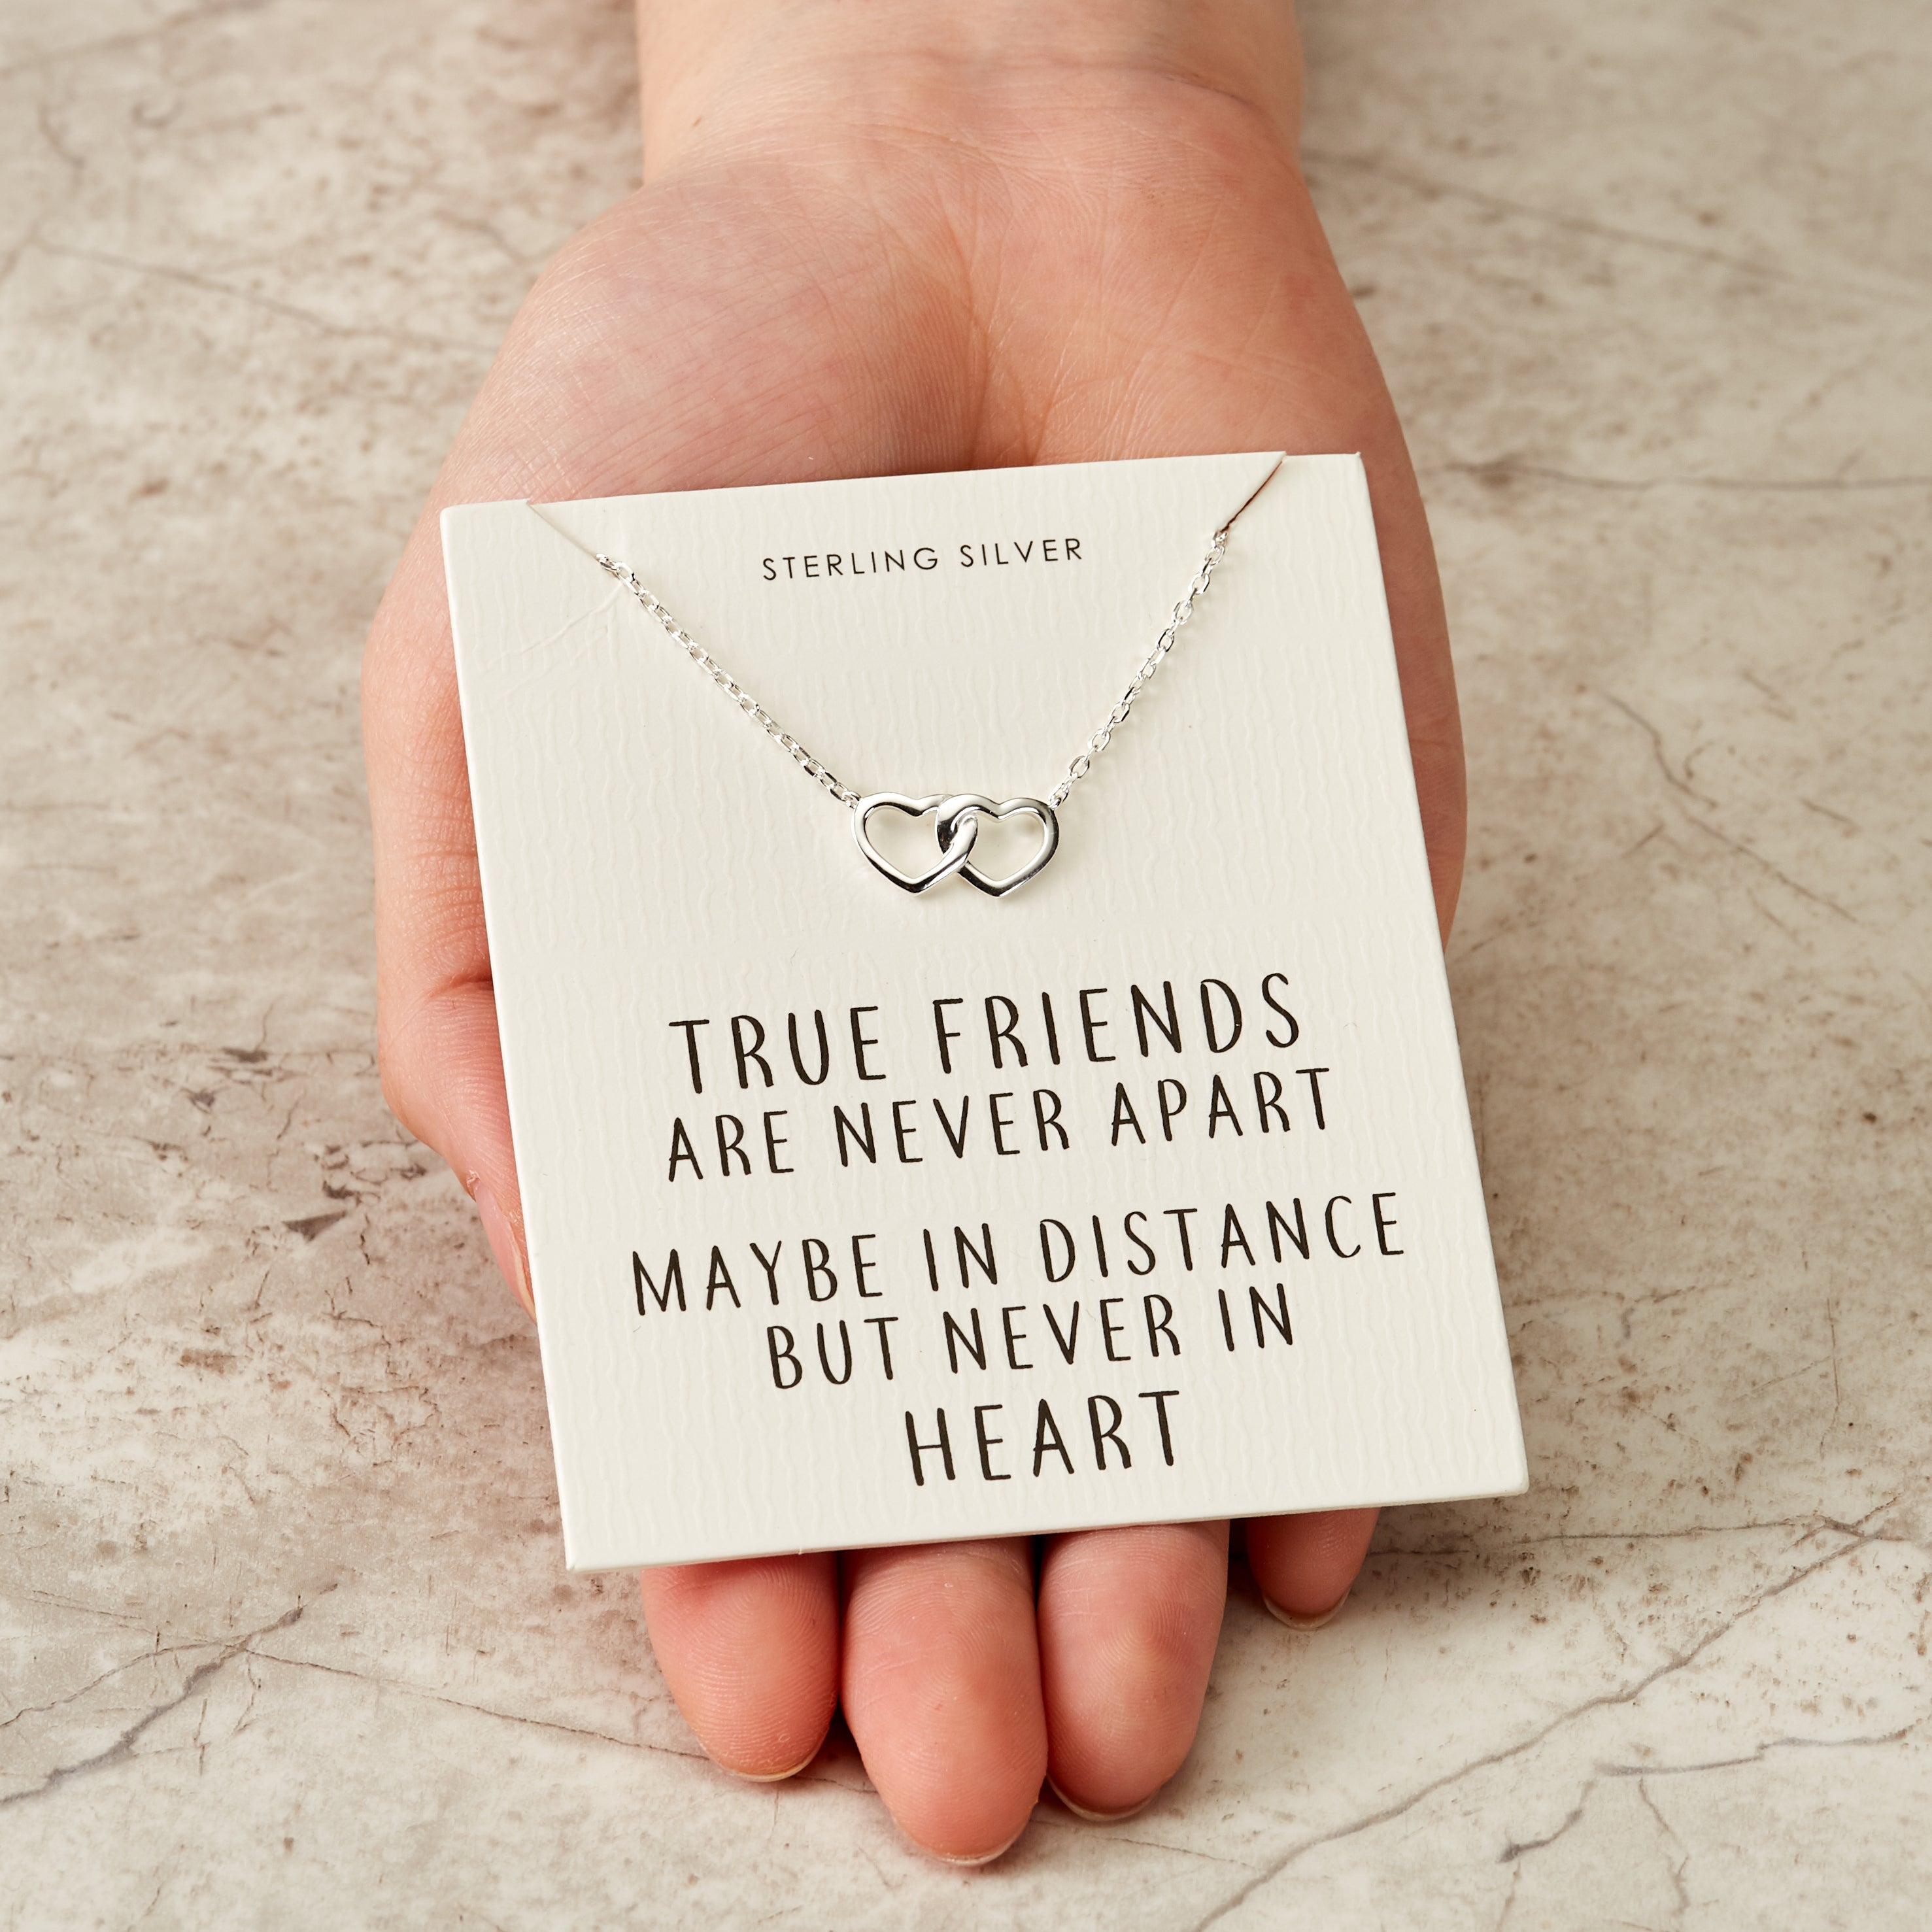 Sterling Silver True Friends Heart Link Necklace with Quote Card